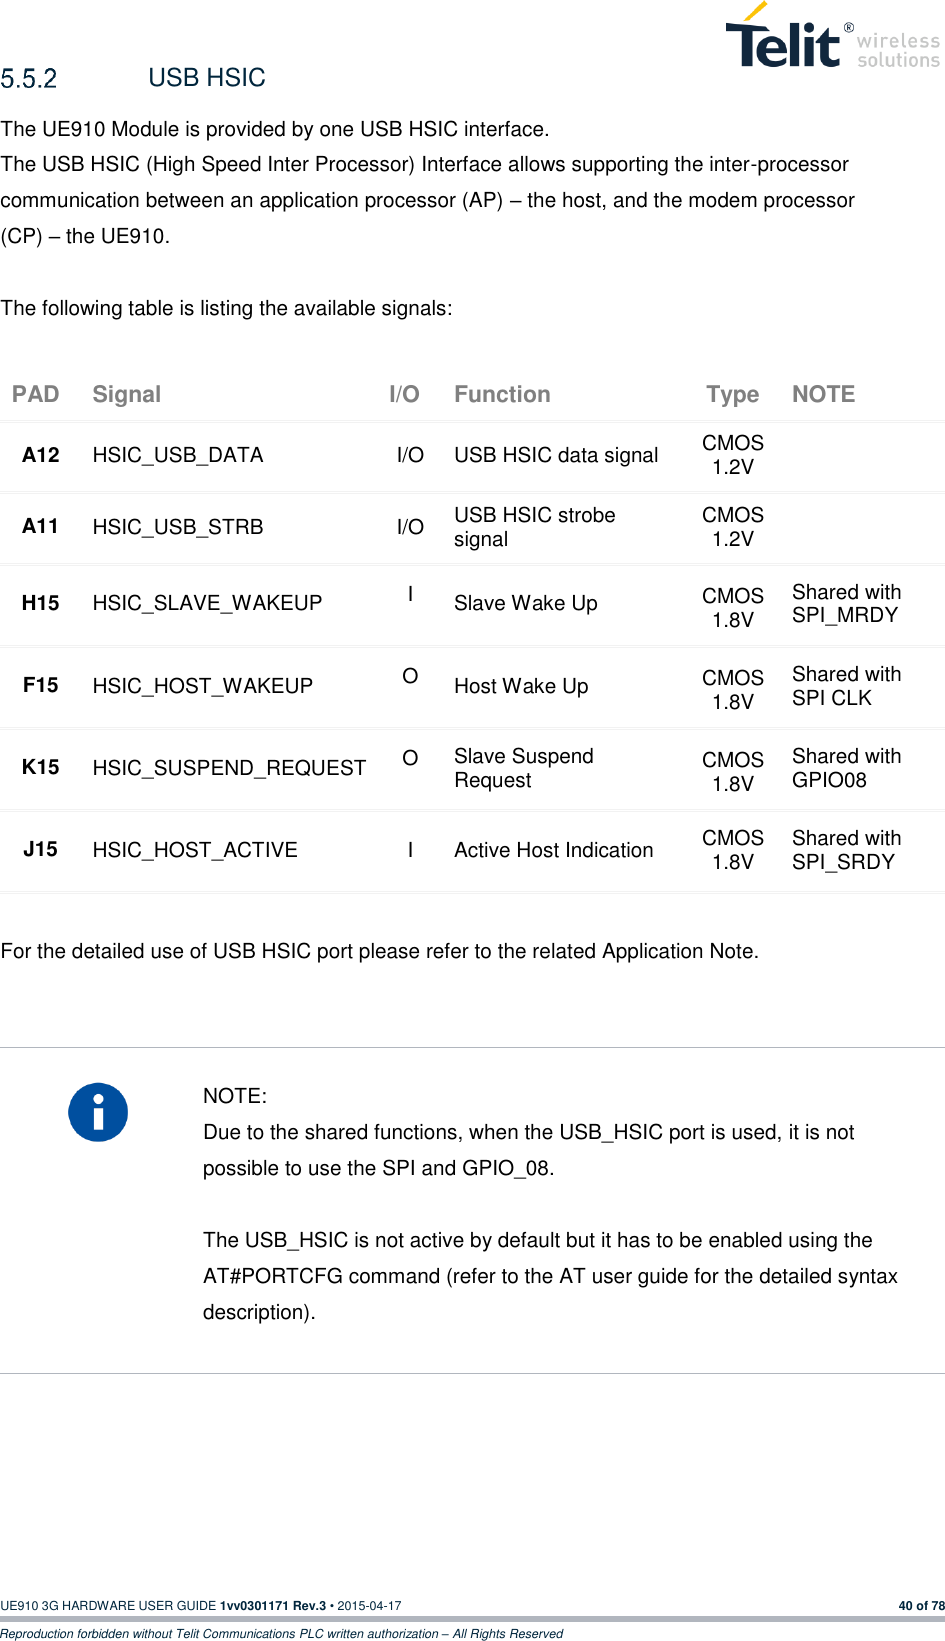  UE910 3G HARDWARE USER GUIDE 1vv0301171 Rev.3 • 2015-04-17 40 of 78 Reproduction forbidden without Telit Communications PLC written authorization – All Rights Reserved   USB HSIC The UE910 Module is provided by one USB HSIC interface.   The USB HSIC (High Speed Inter Processor) Interface allows supporting the inter-processor  communication between an application processor (AP) – the host, and the modem processor  (CP) – the UE910.  The following table is listing the available signals: PAD Signal I/O Function Type NOTE A12 HSIC_USB_DATA I/O USB HSIC data signal CMOS 1.2V  A11 HSIC_USB_STRB I/O USB HSIC strobe signal CMOS 1.2V  H15 HSIC_SLAVE_WAKEUP I Slave Wake Up CMOS 1.8V Shared with SPI_MRDY F15 HSIC_HOST_WAKEUP O Host Wake Up CMOS 1.8V Shared with SPI CLK K15 HSIC_SUSPEND_REQUEST O Slave Suspend Request CMOS 1.8V Shared with GPIO08  J15 HSIC_HOST_ACTIVE I Active Host Indication CMOS 1.8V Shared with SPI_SRDY  For the detailed use of USB HSIC port please refer to the related Application Note.     NOTE: Due to the shared functions, when the USB_HSIC port is used, it is not possible to use the SPI and GPIO_08.  The USB_HSIC is not active by default but it has to be enabled using the AT#PORTCFG command (refer to the AT user guide for the detailed syntax description).     